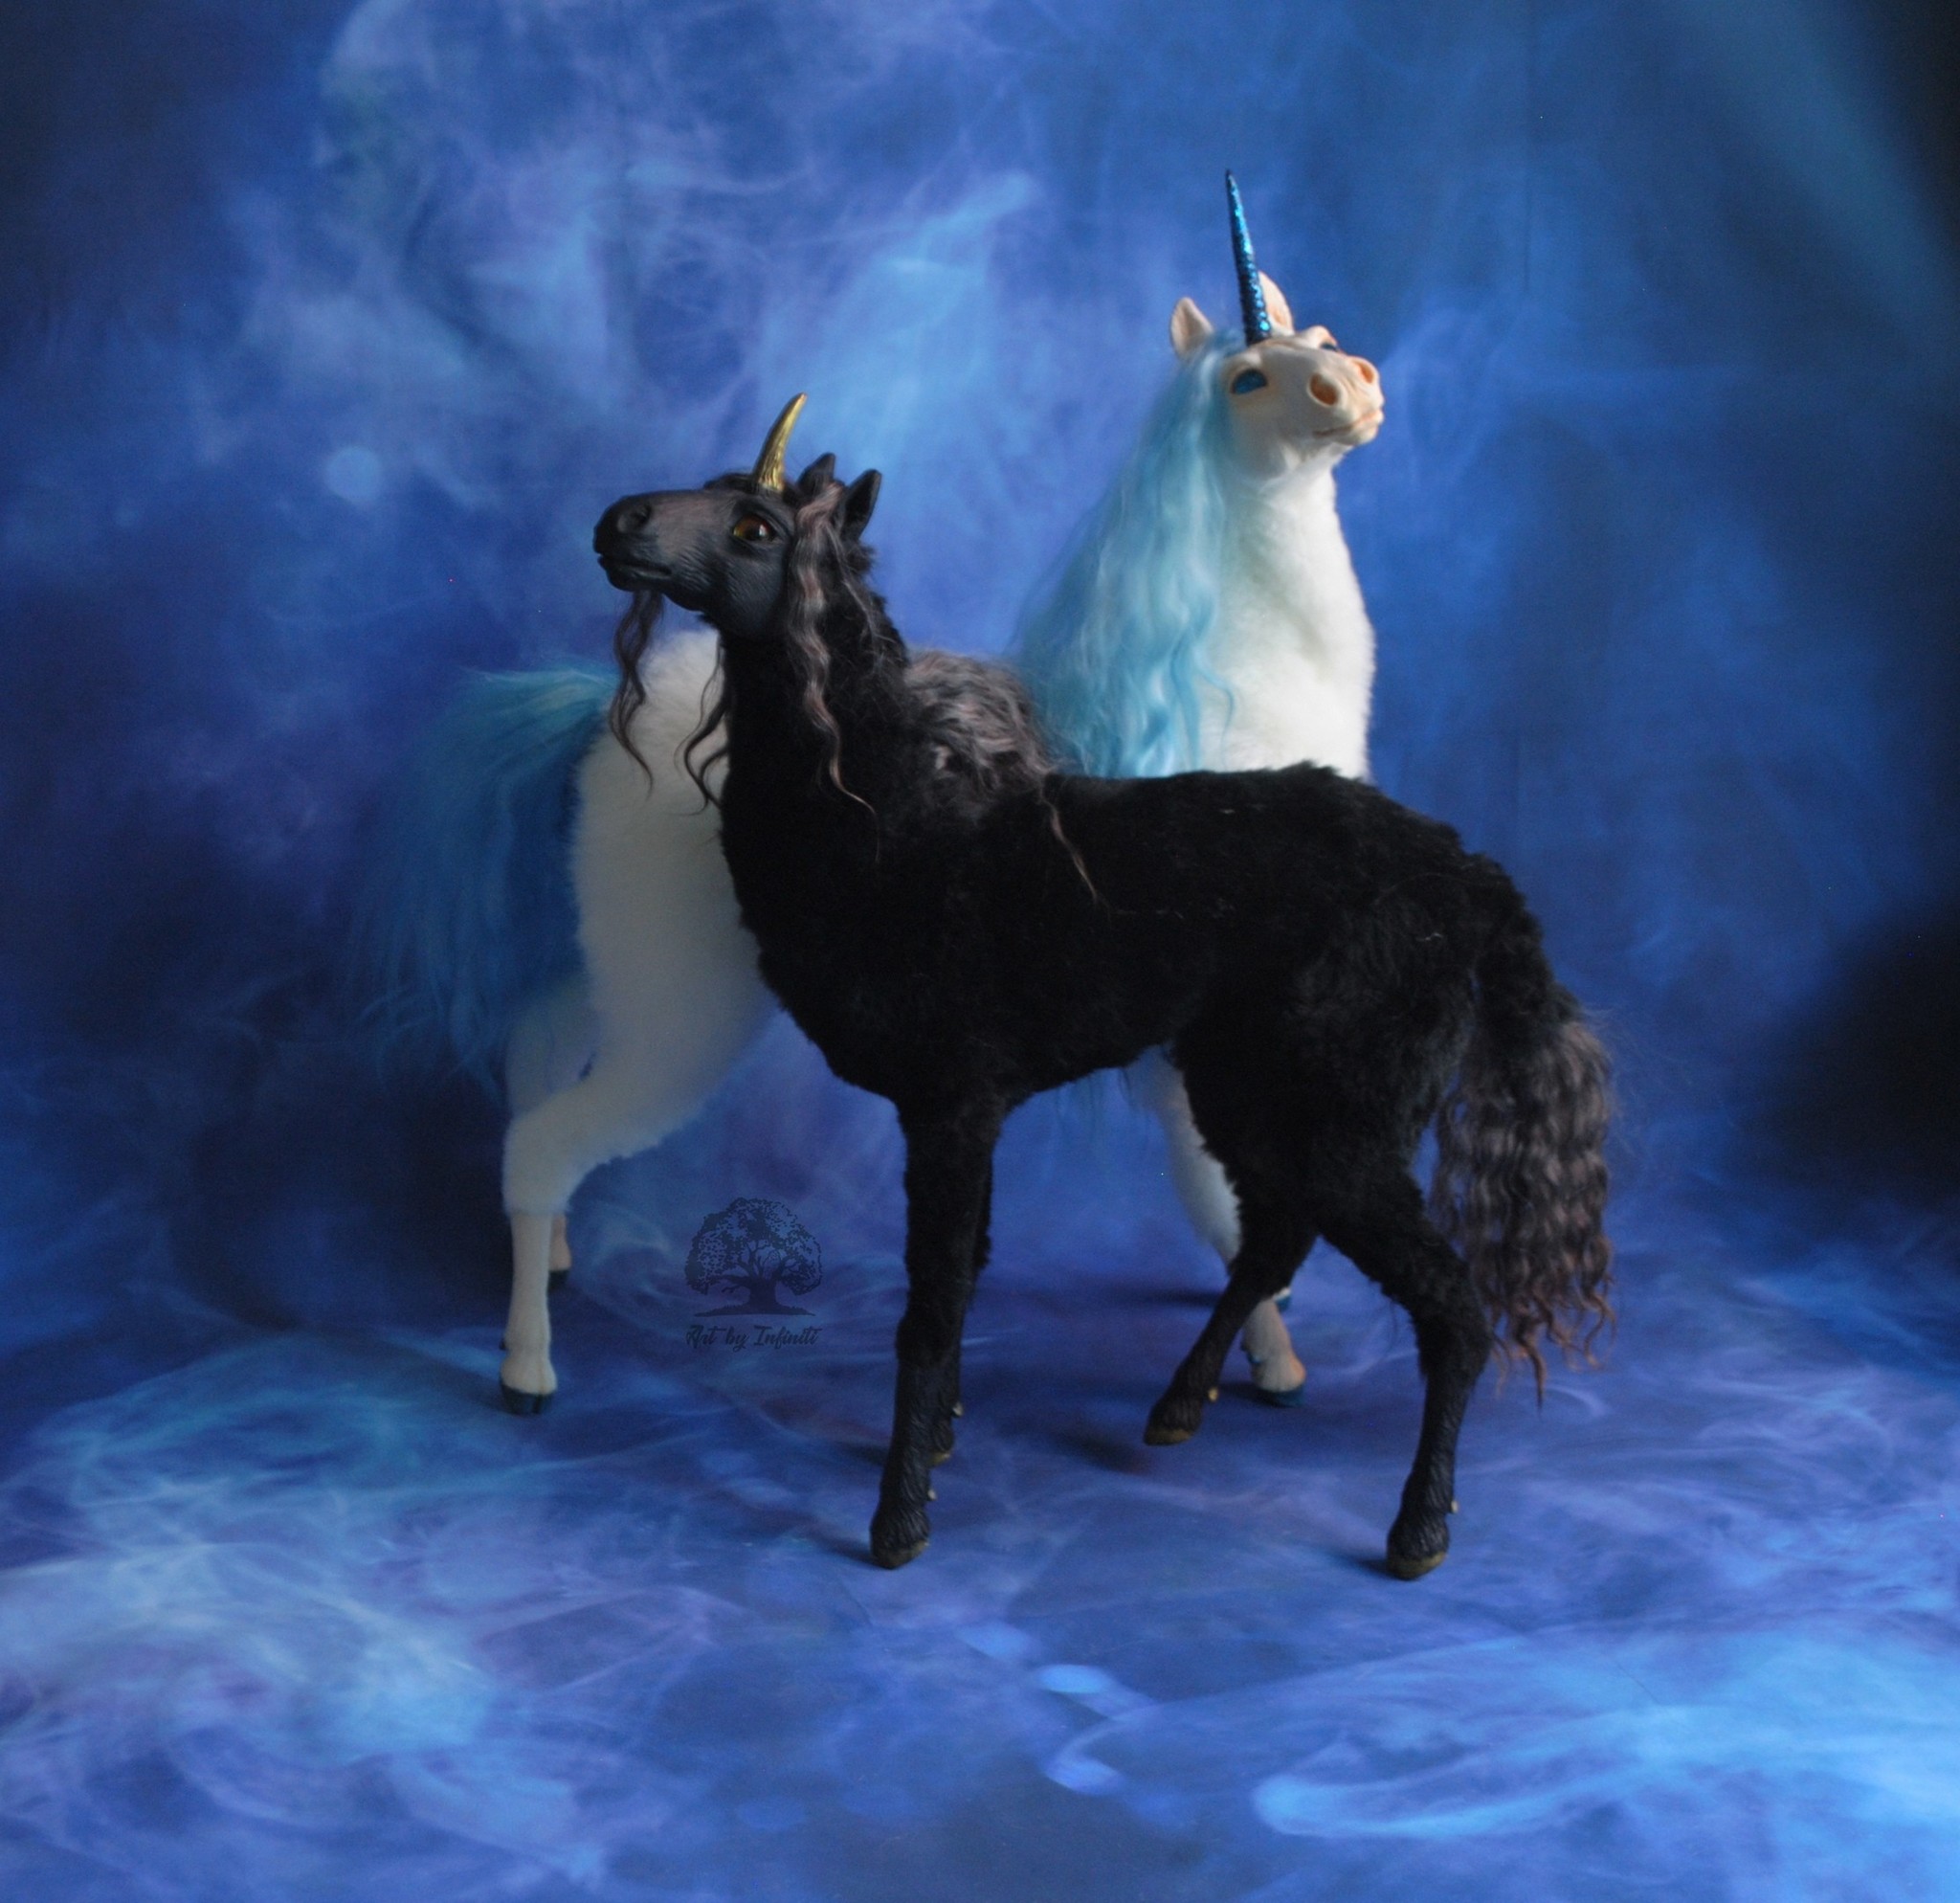 Unicorns - moving toys in mixed media - My, Unicorn, Polymer clay, Pair, Author's toy, Horses, Needlework without process, Longpost